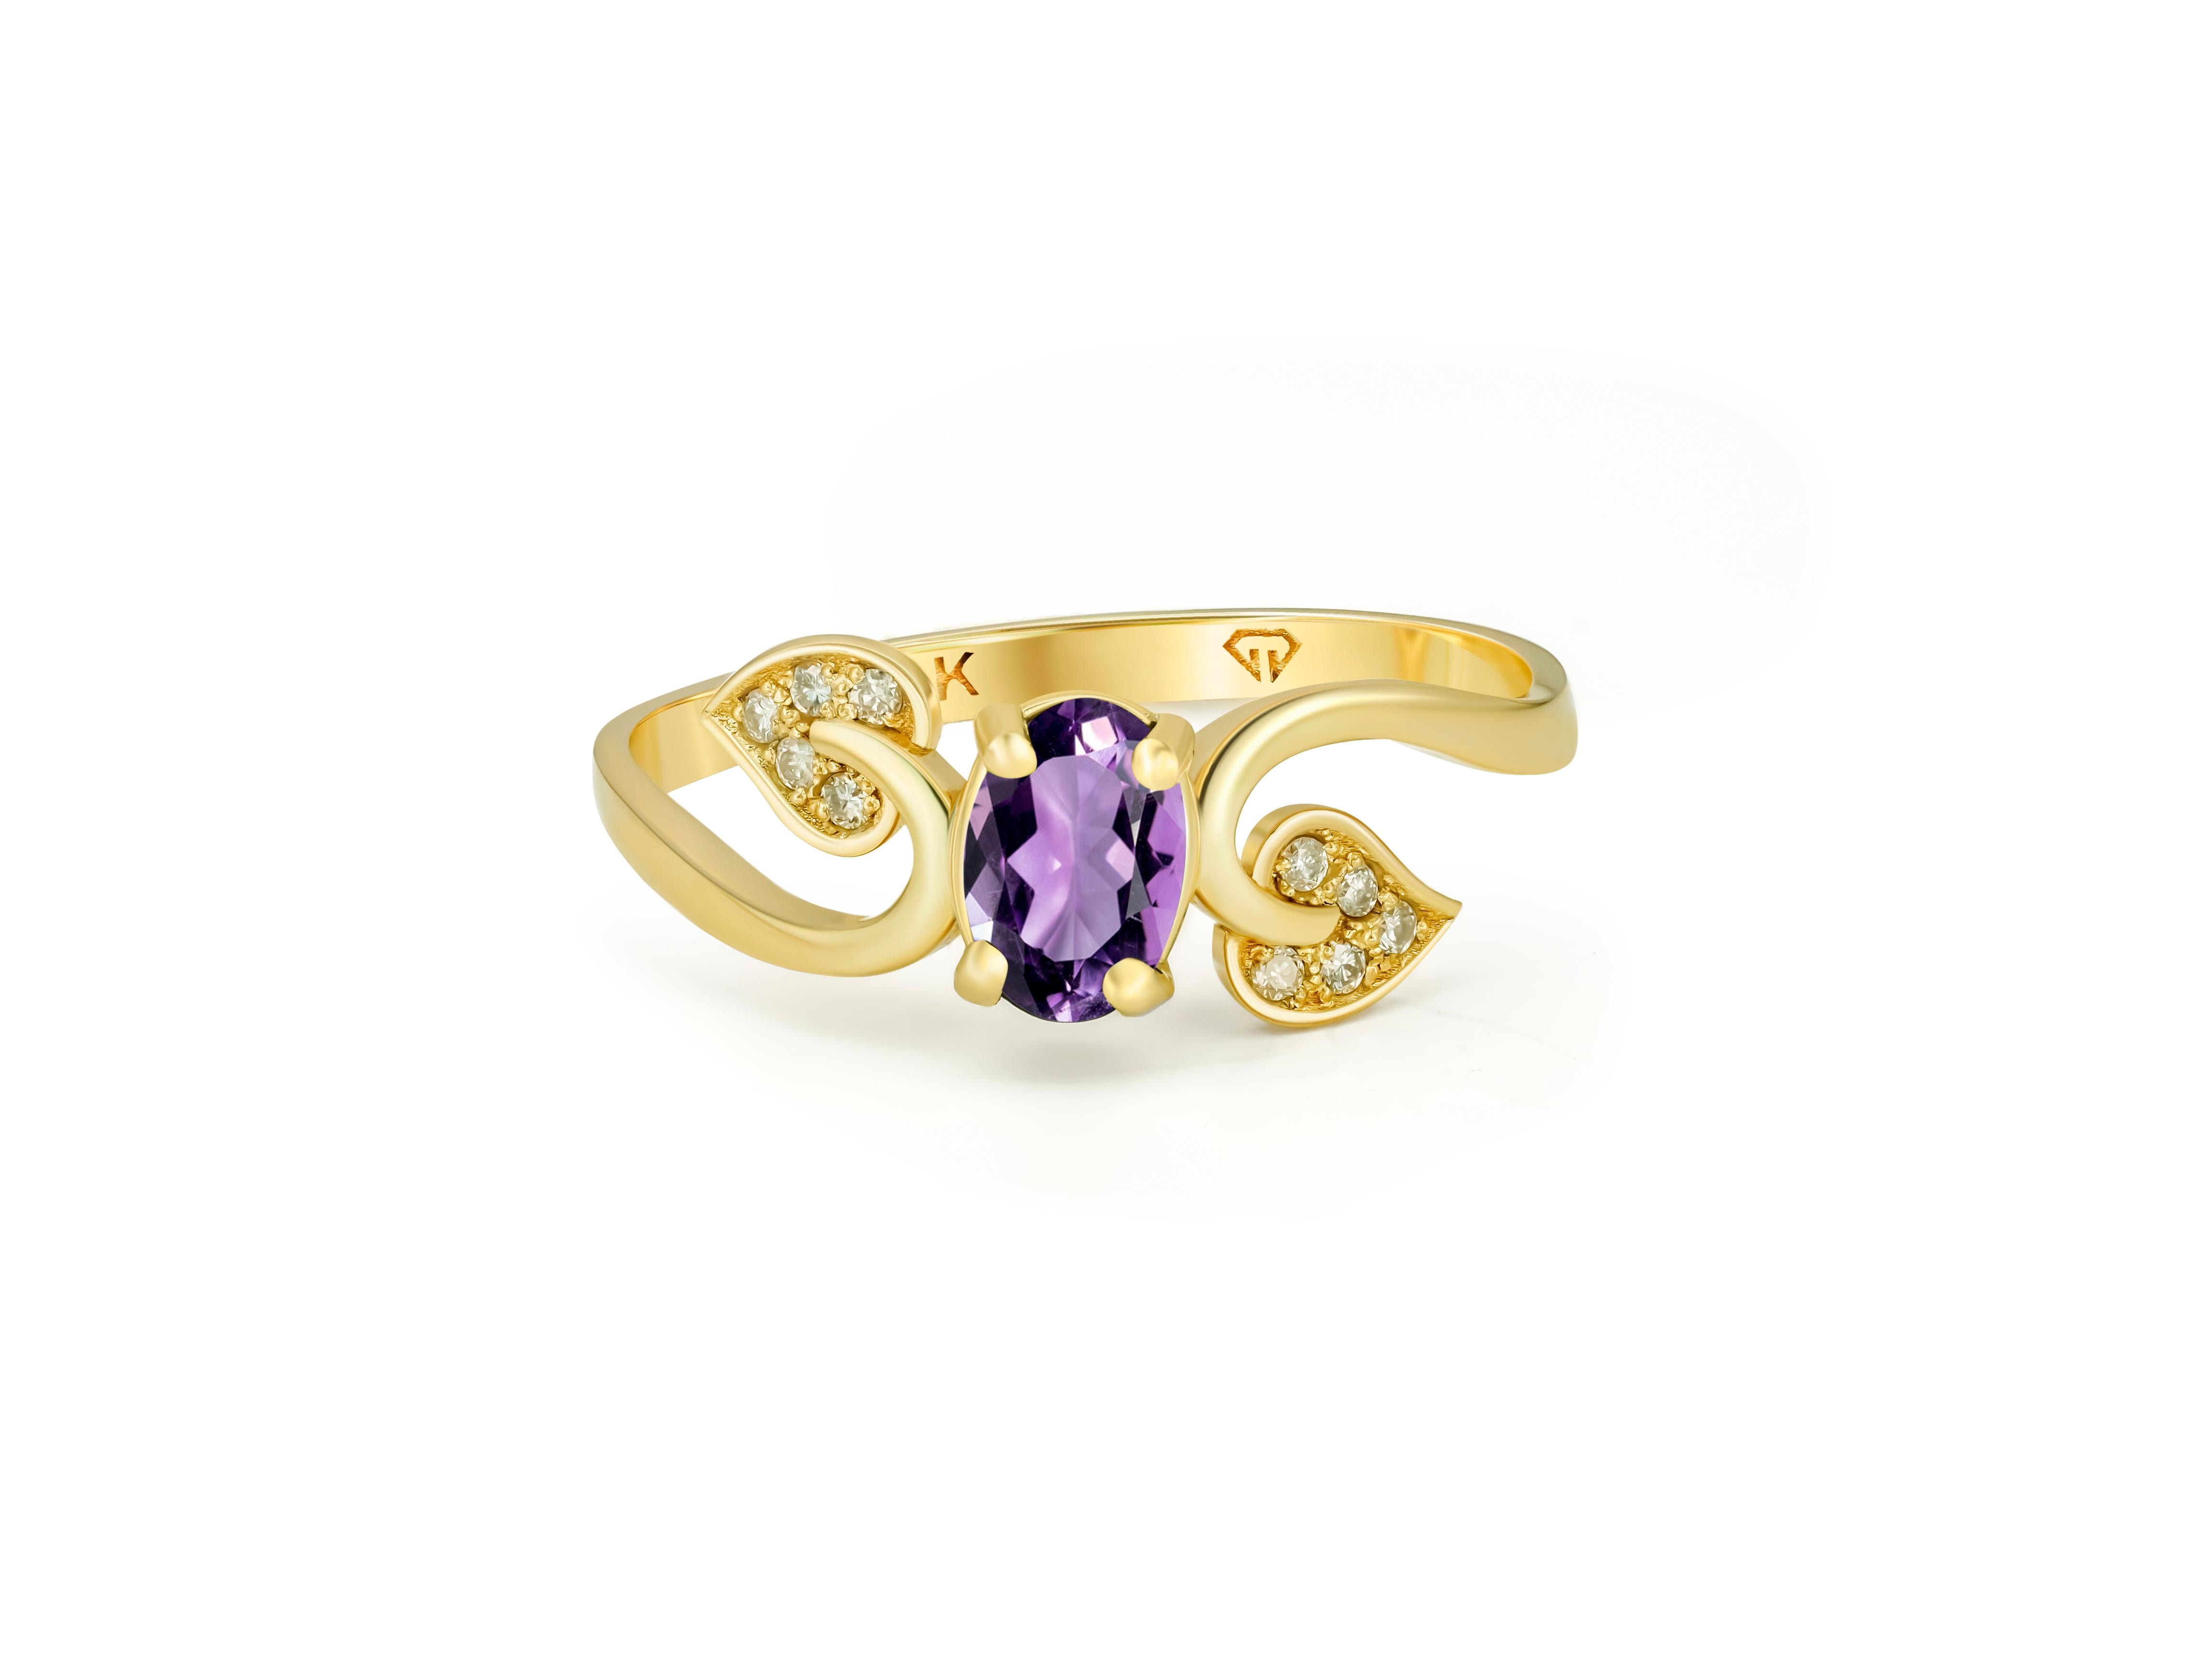 Amethyst 14k gold ring. 
Oval Amethyst rin. Amethyst engagement ring. Amethyst vintage ring. February birthstone ring. Gold leaves ring.

Metal: 14kt solid gold
Total weight: 1.8 gr. (depends from size)

Central gemstone: Natural Amethyst
Color: